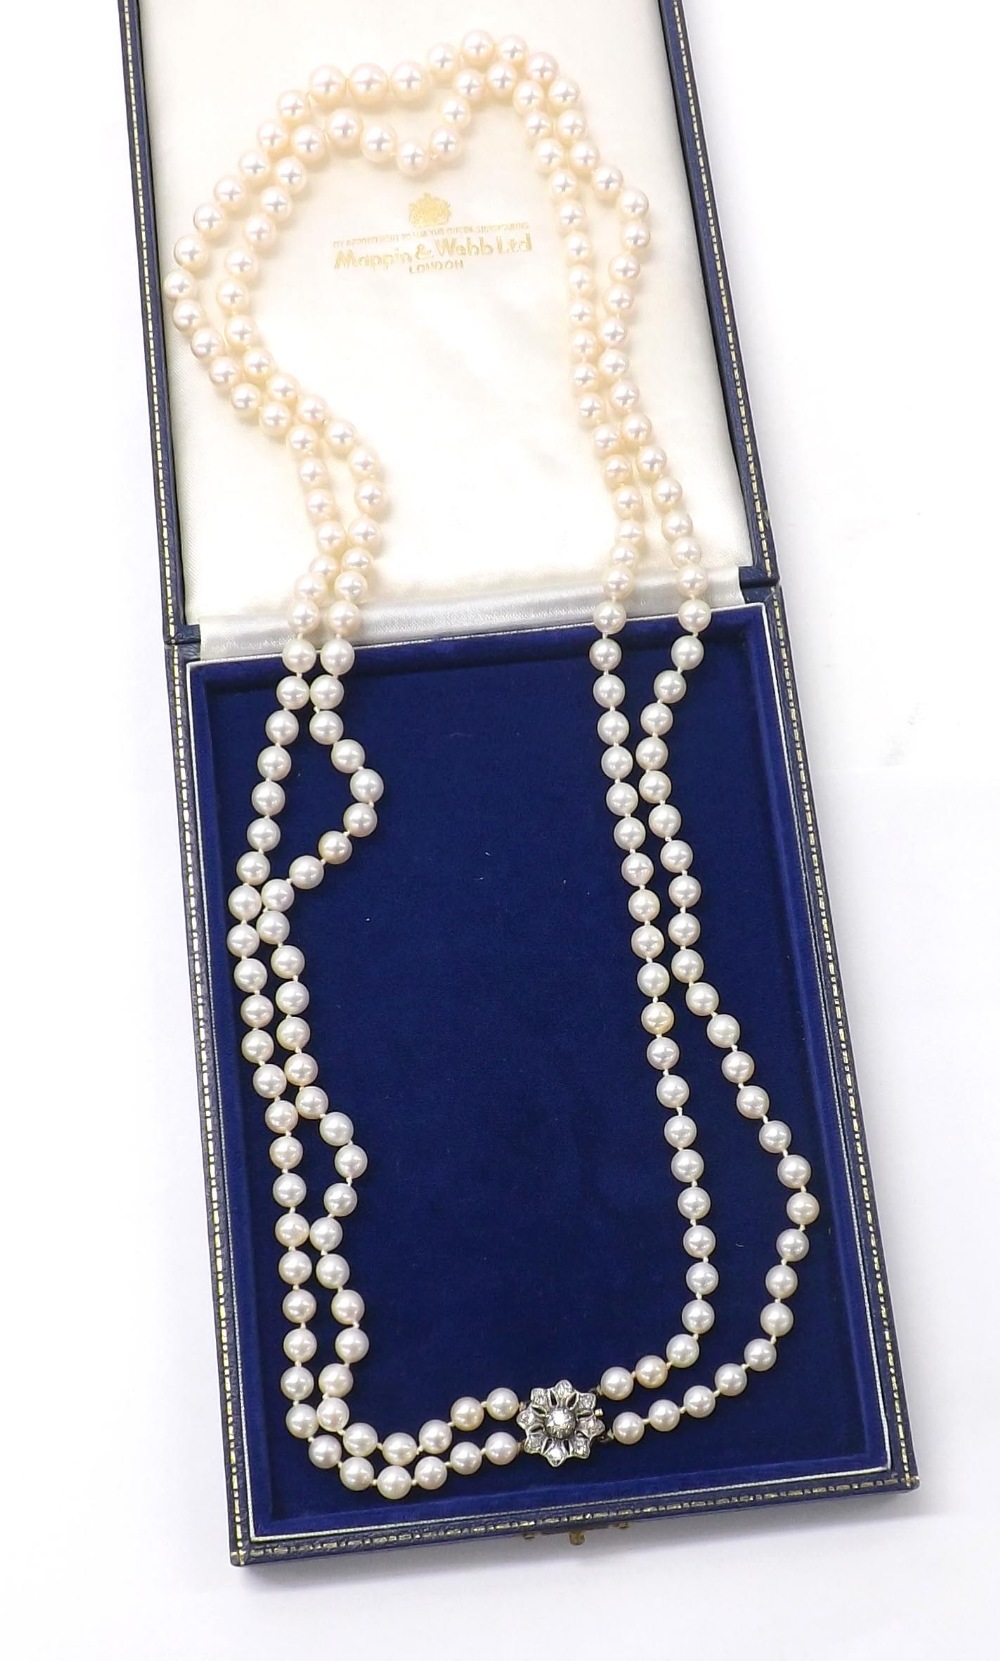 Fine quality double row of cultured pearls, graduating from 6.6mm to 9.6mm, floral white metal